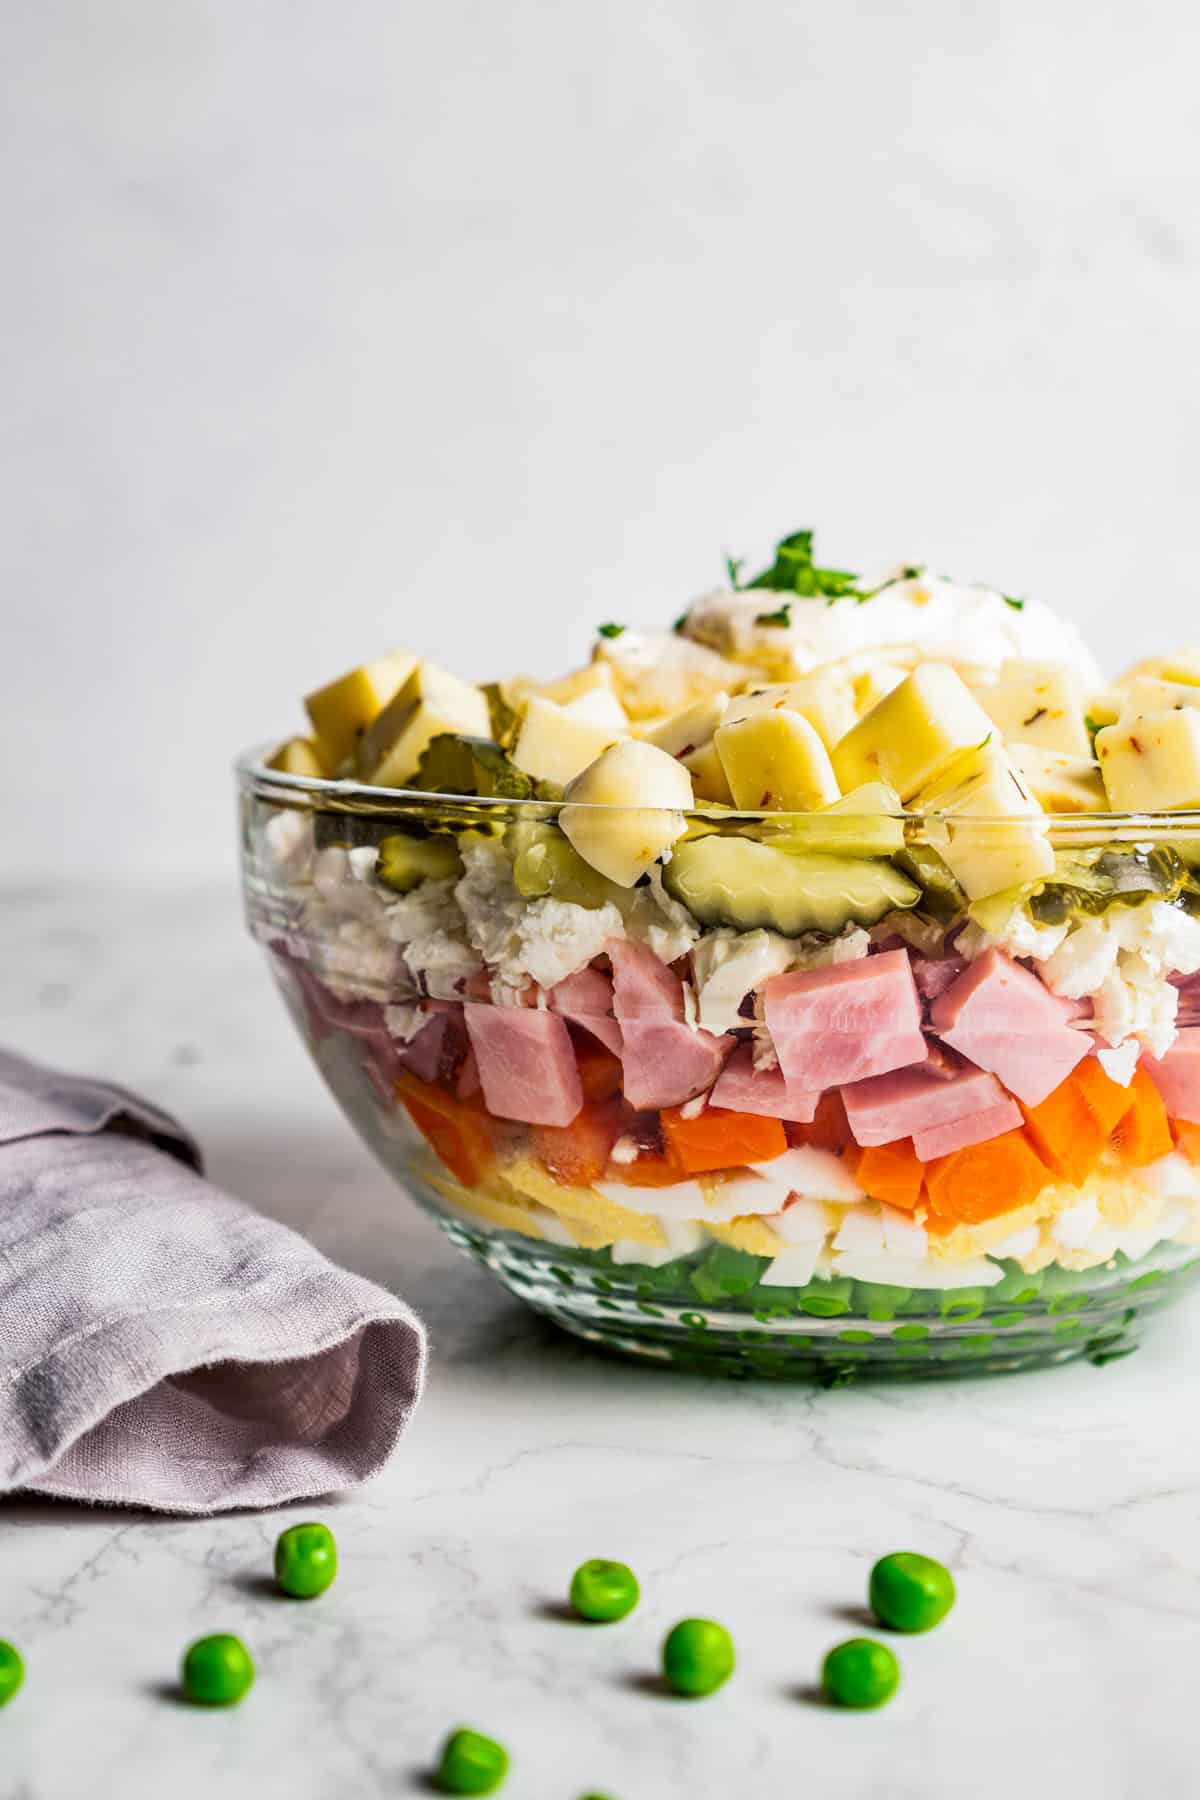 Side view of a layered Russian salad in a glass bowl next to a second bowl filled with peas, and peas scattered on the countertop.